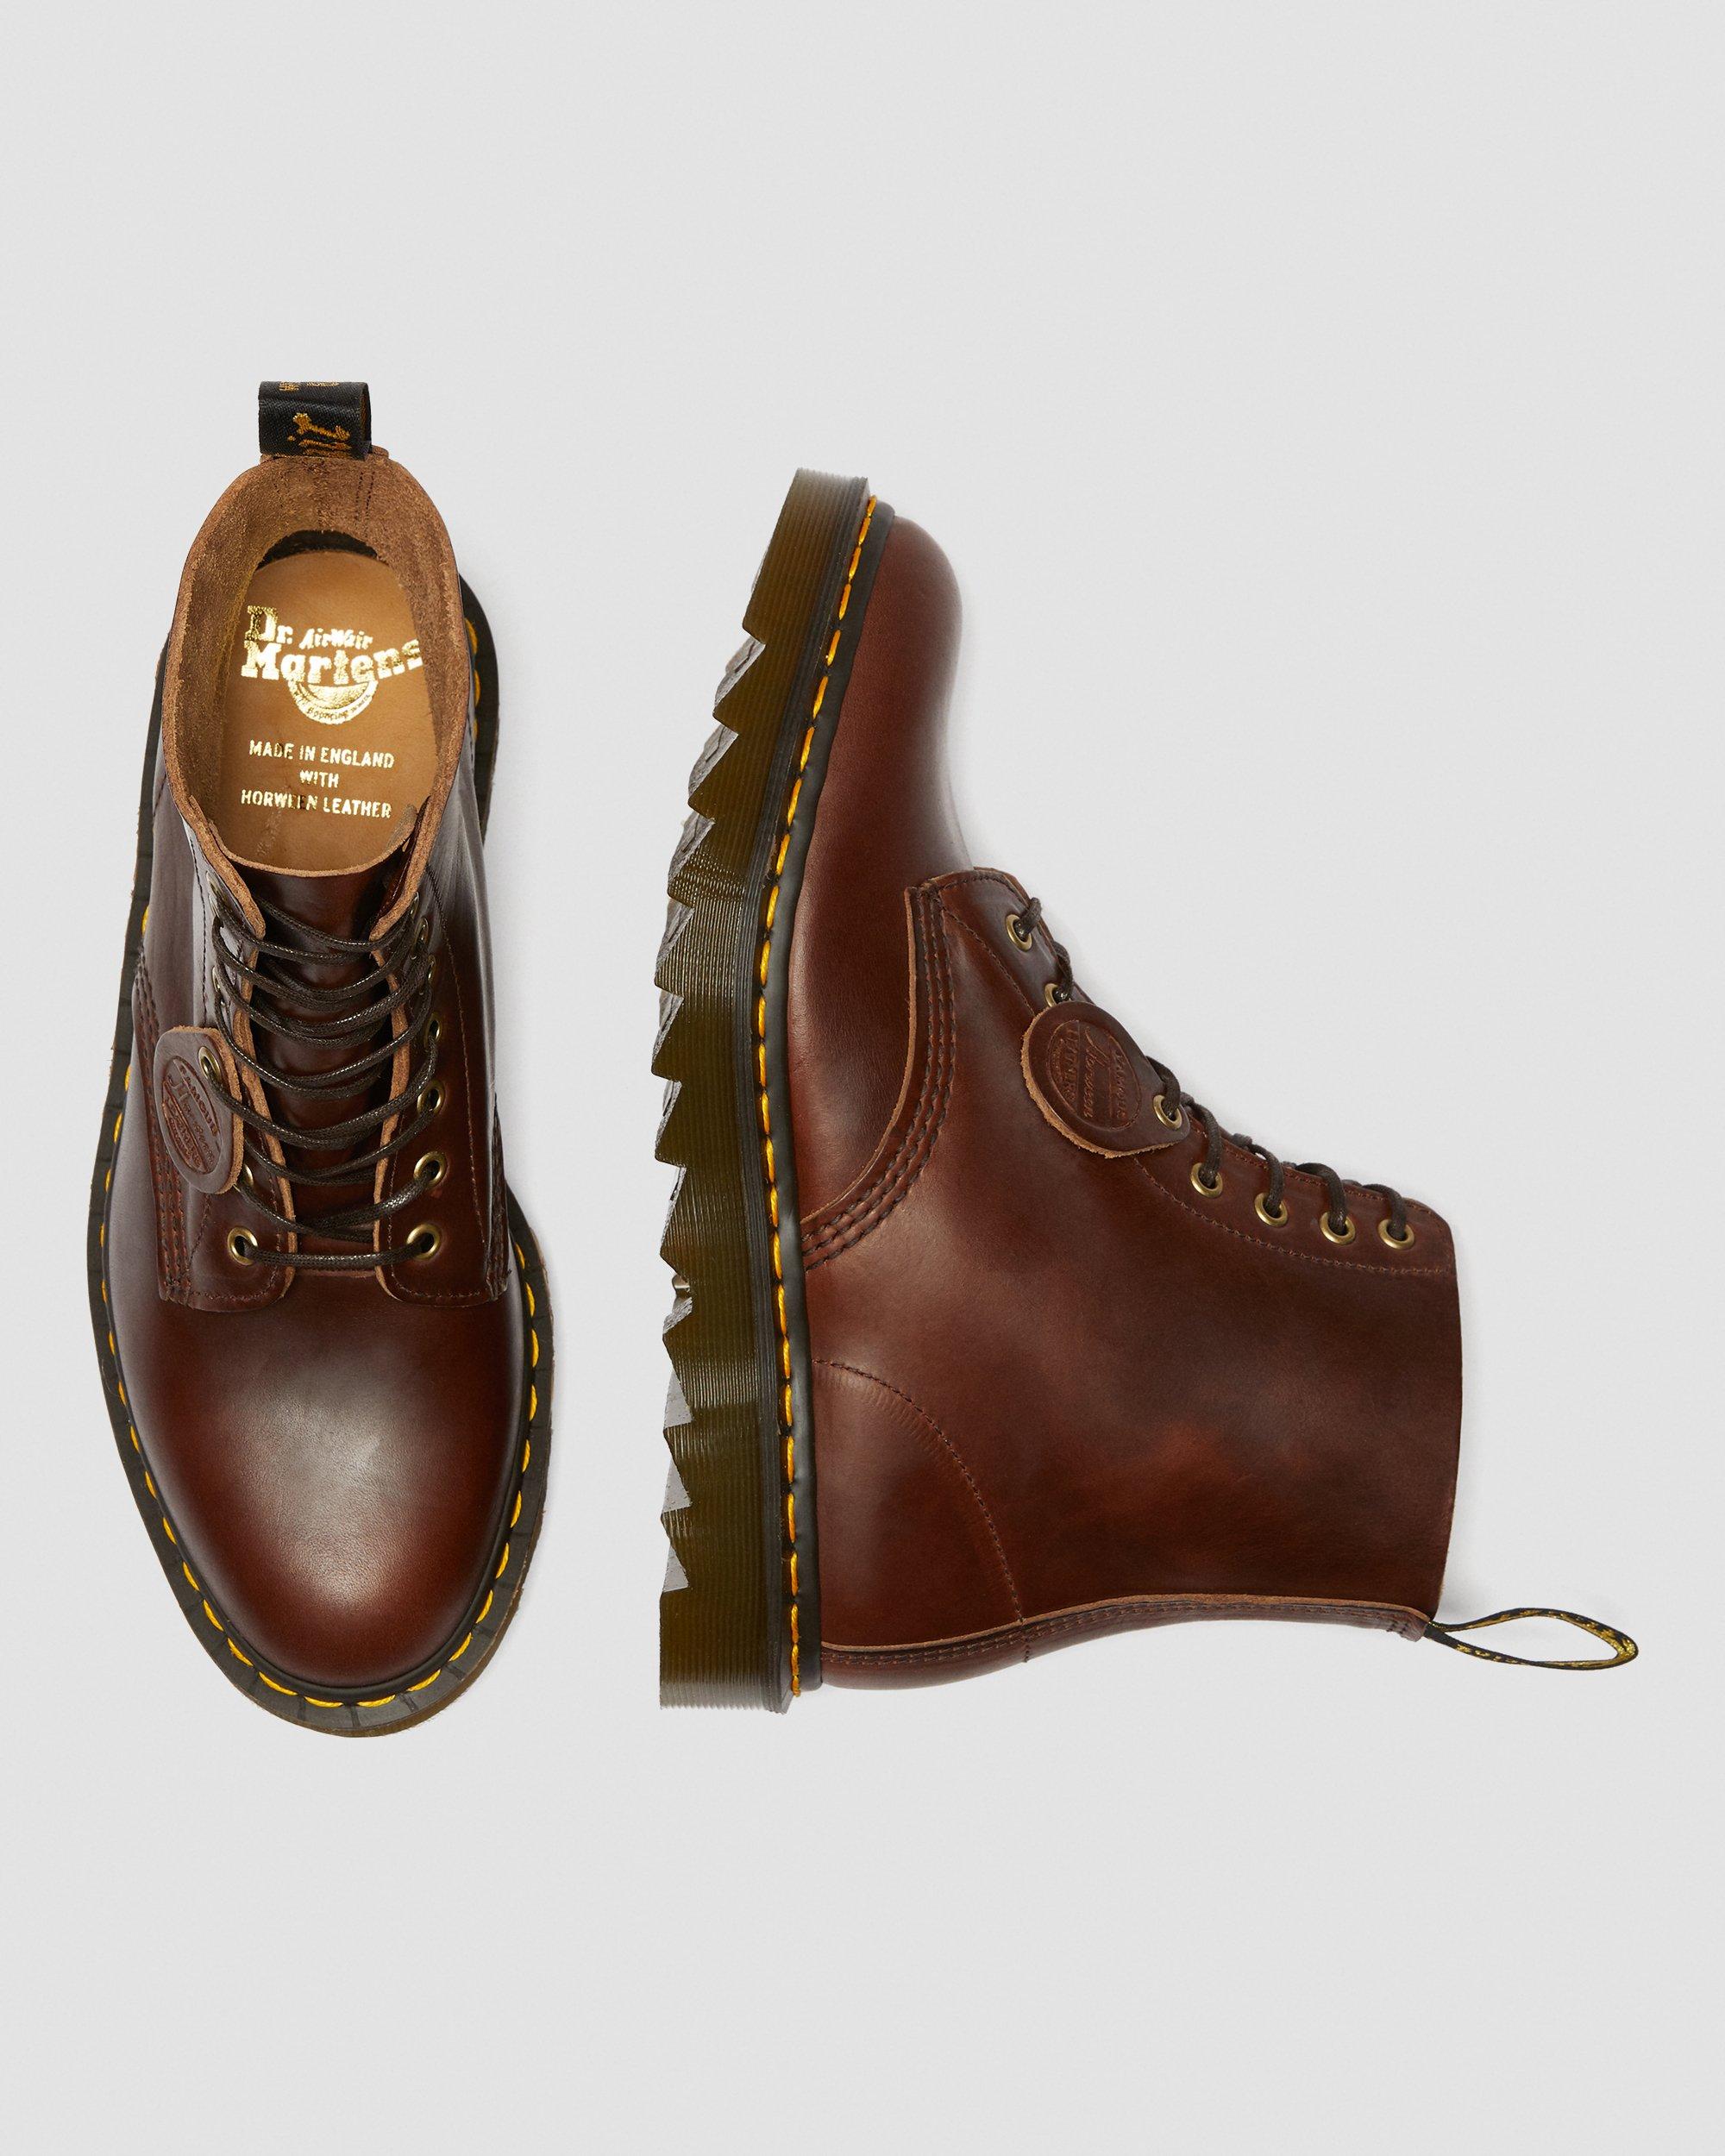 DR MARTENS 1460 Pascal Made In England Ripple Sole Boots